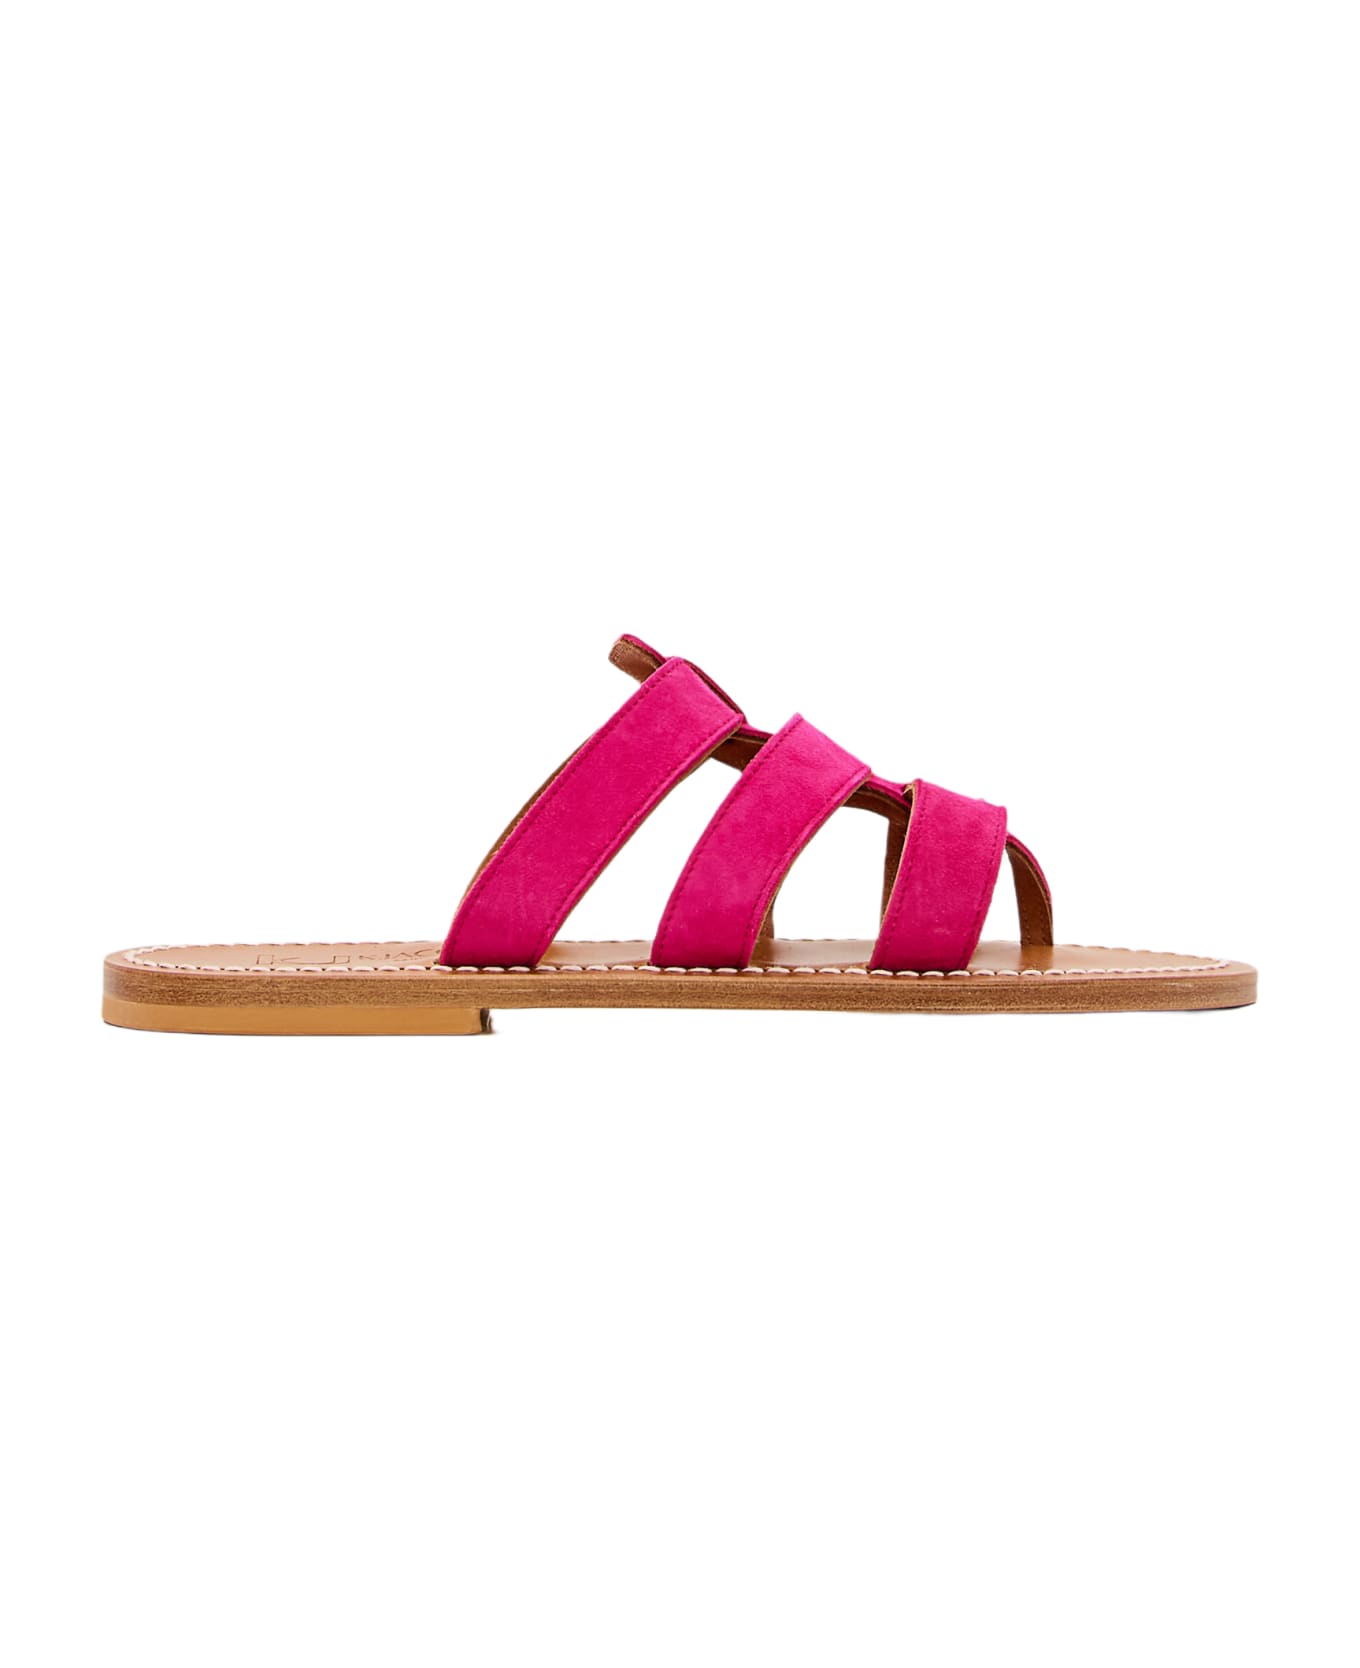 K.Jacques Dolon Leather Sandals - Red サンダル